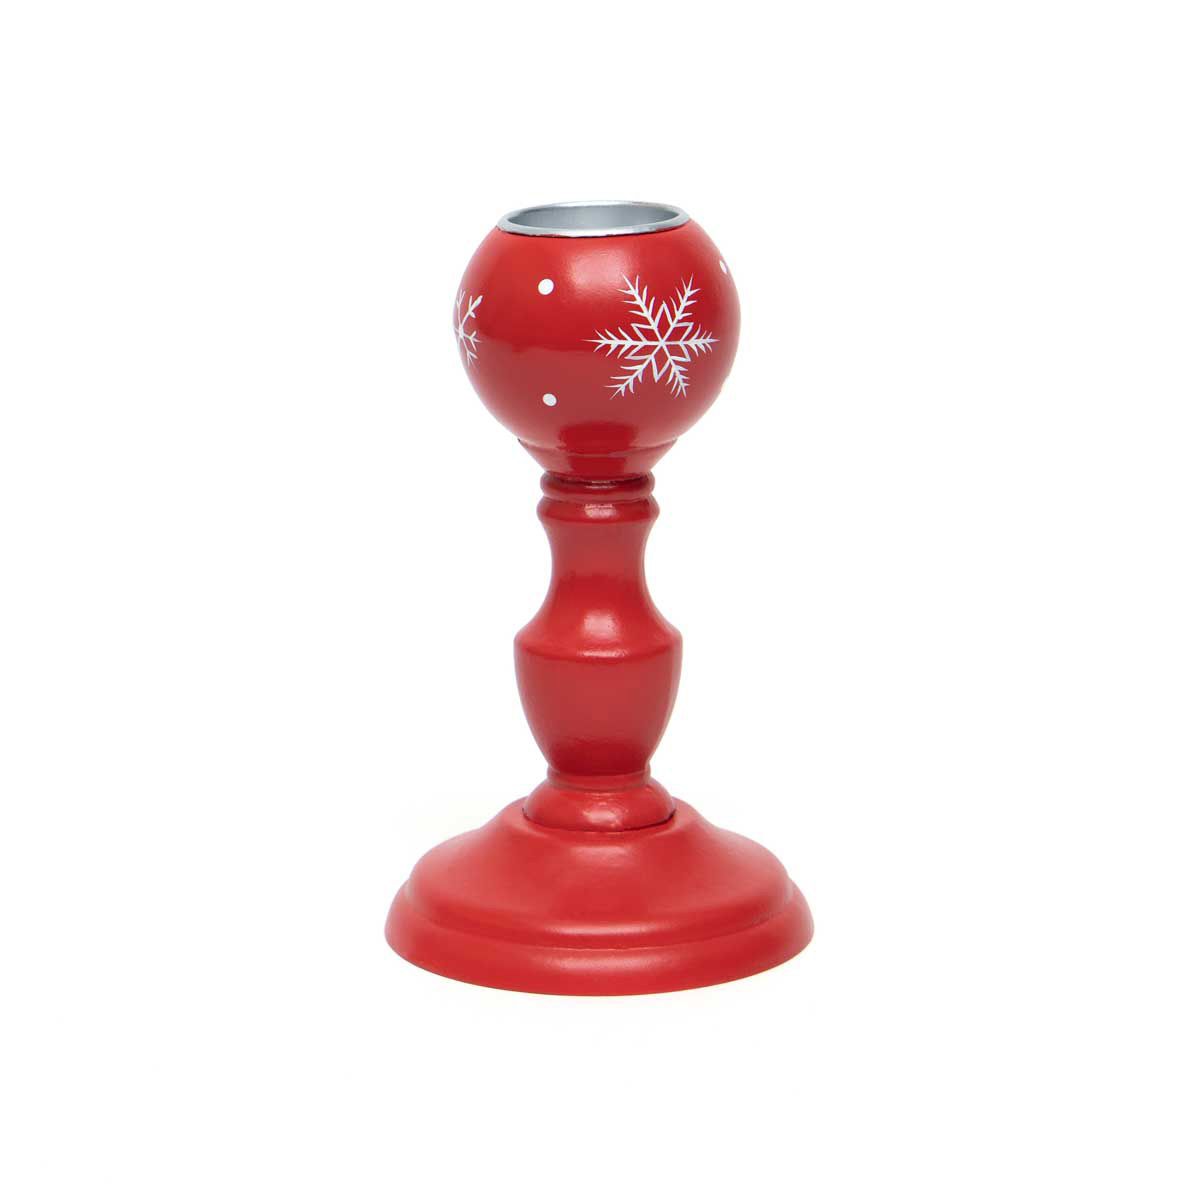 SWEDISH BALL CANDLEHOLDER RED/WHITE WITH SNOWFLAKES SMALL